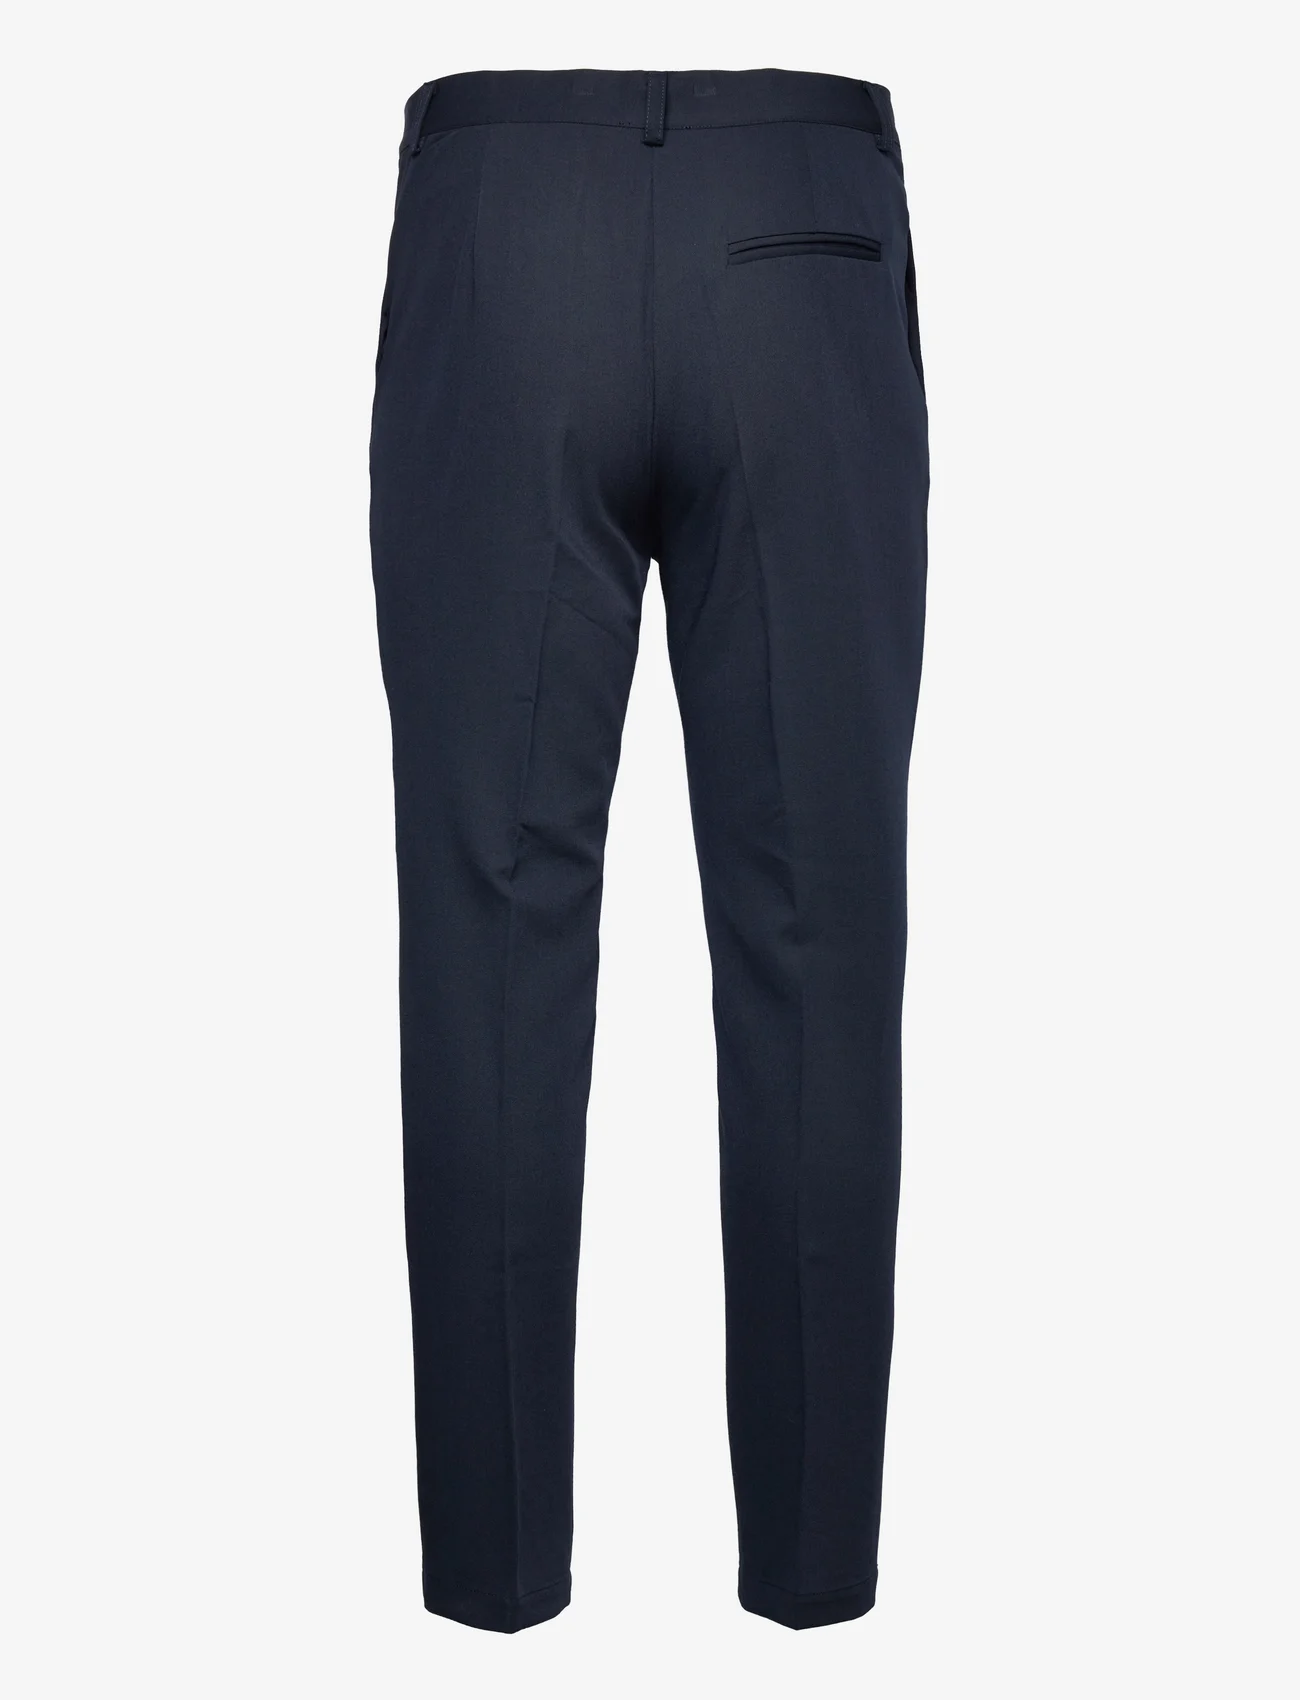 bzr - Twill Comfy Pants - suit trousers - navy - 1